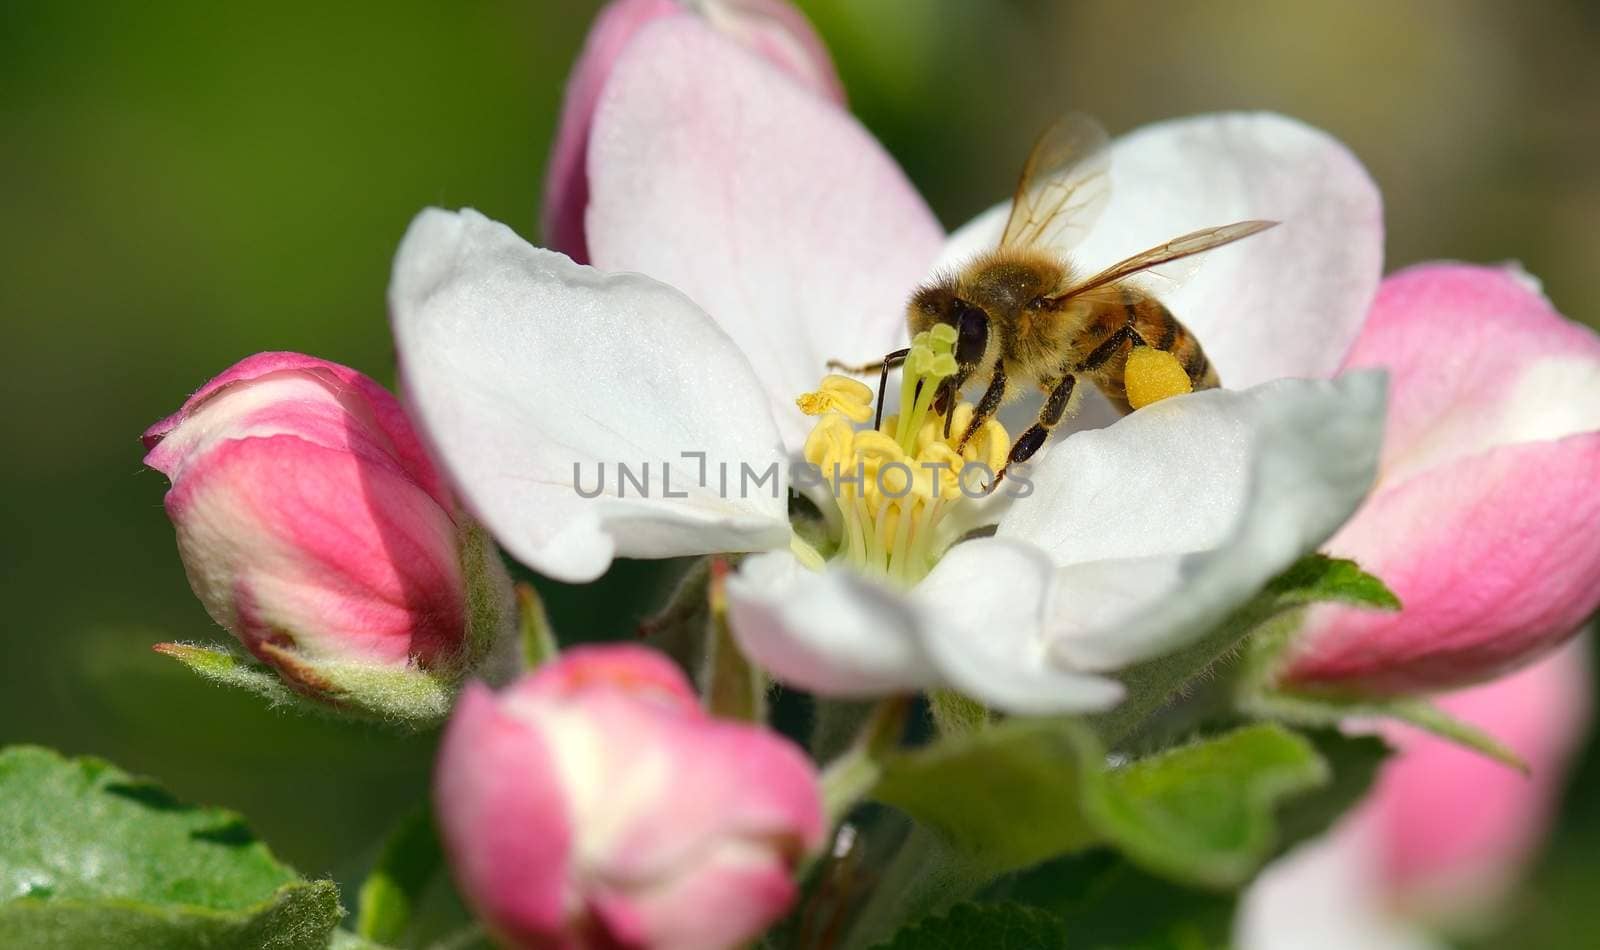 Busy Bee in an apple blossom